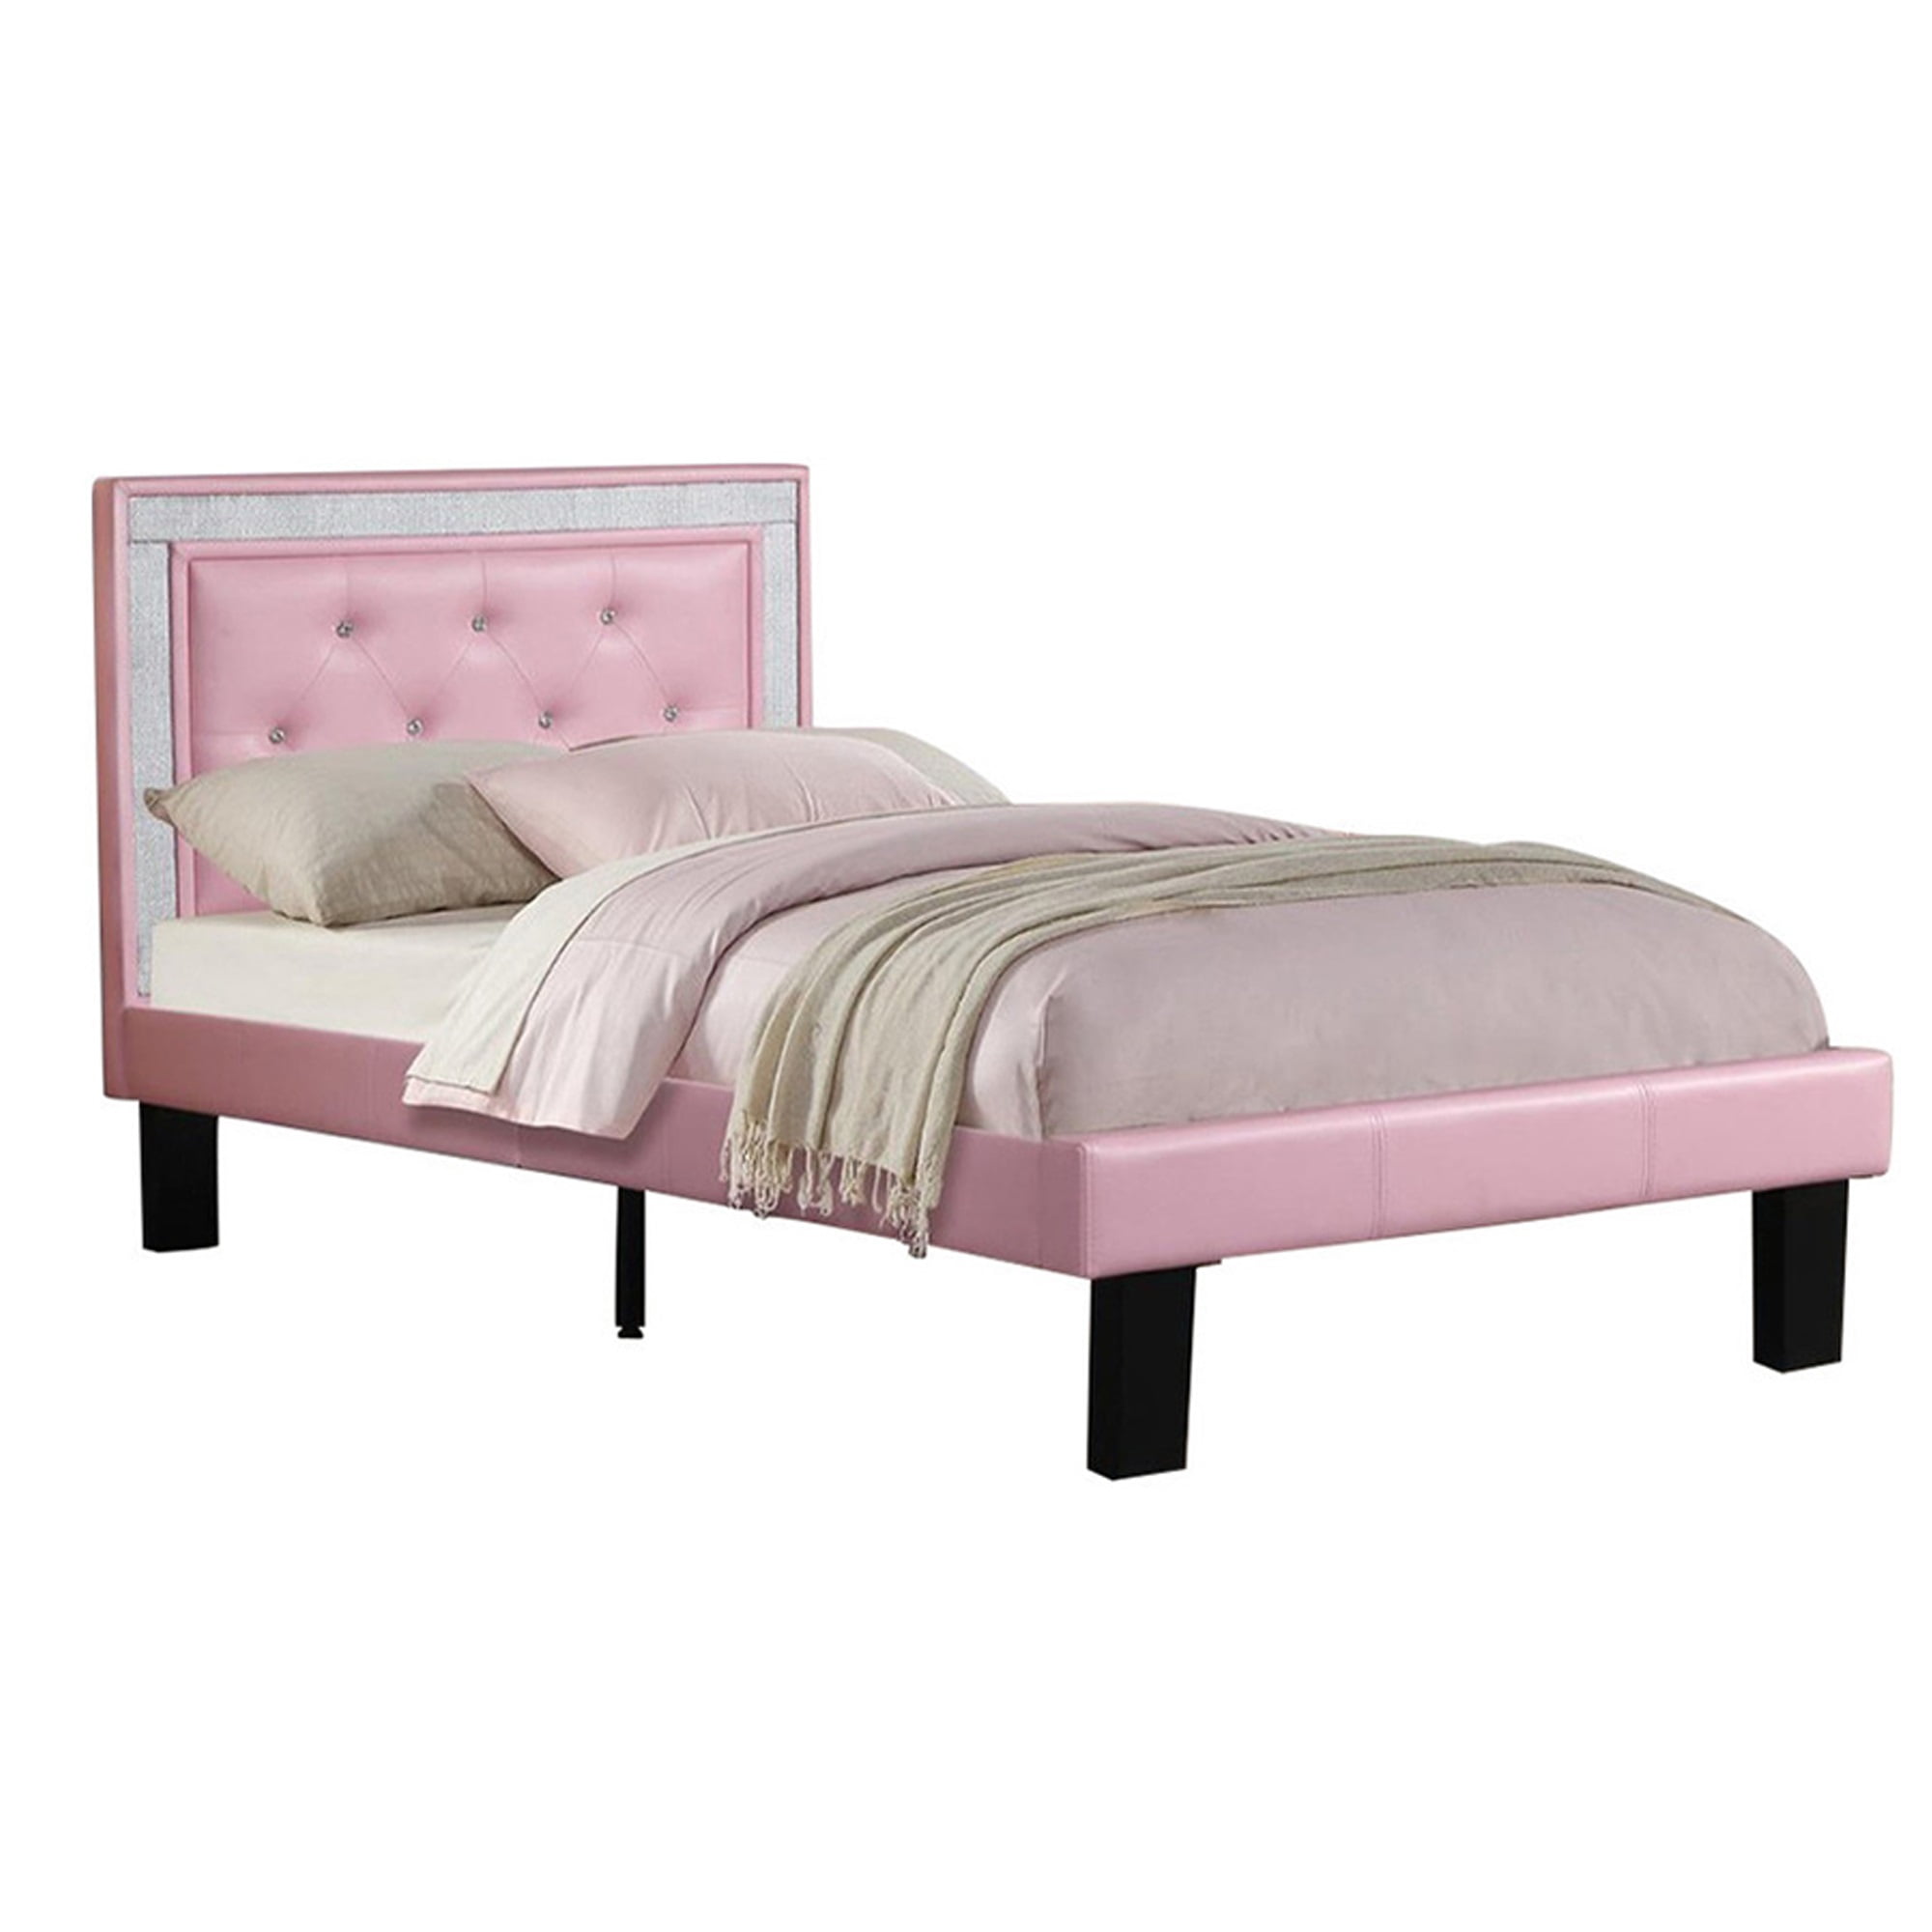 Youth Kids Teen Bedroom Full Bed Button Tufted Crystal Headboard Pink PU Leather 